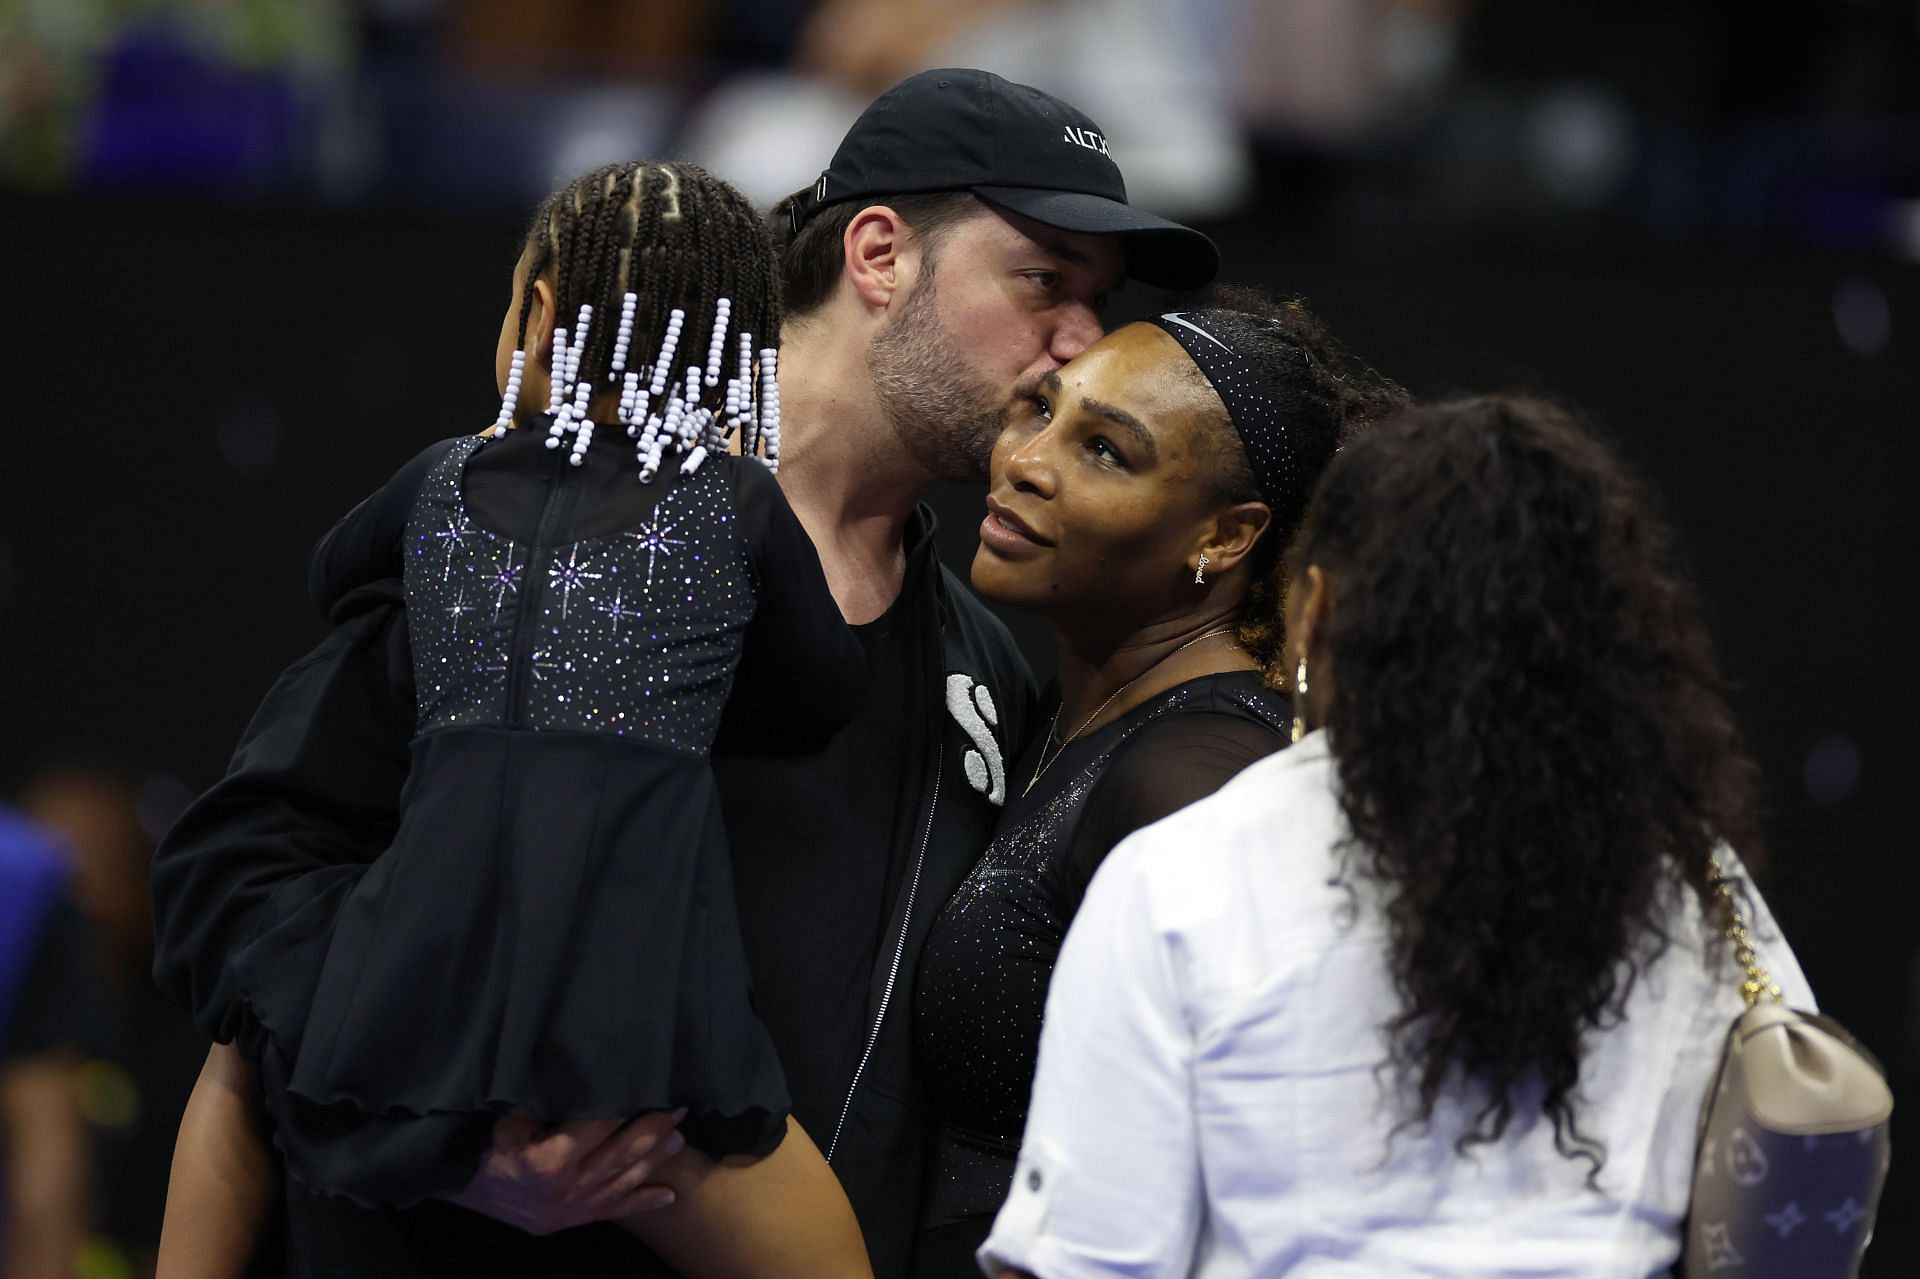 Serena Williams and Alexis Ohanian at the 2022 US Open